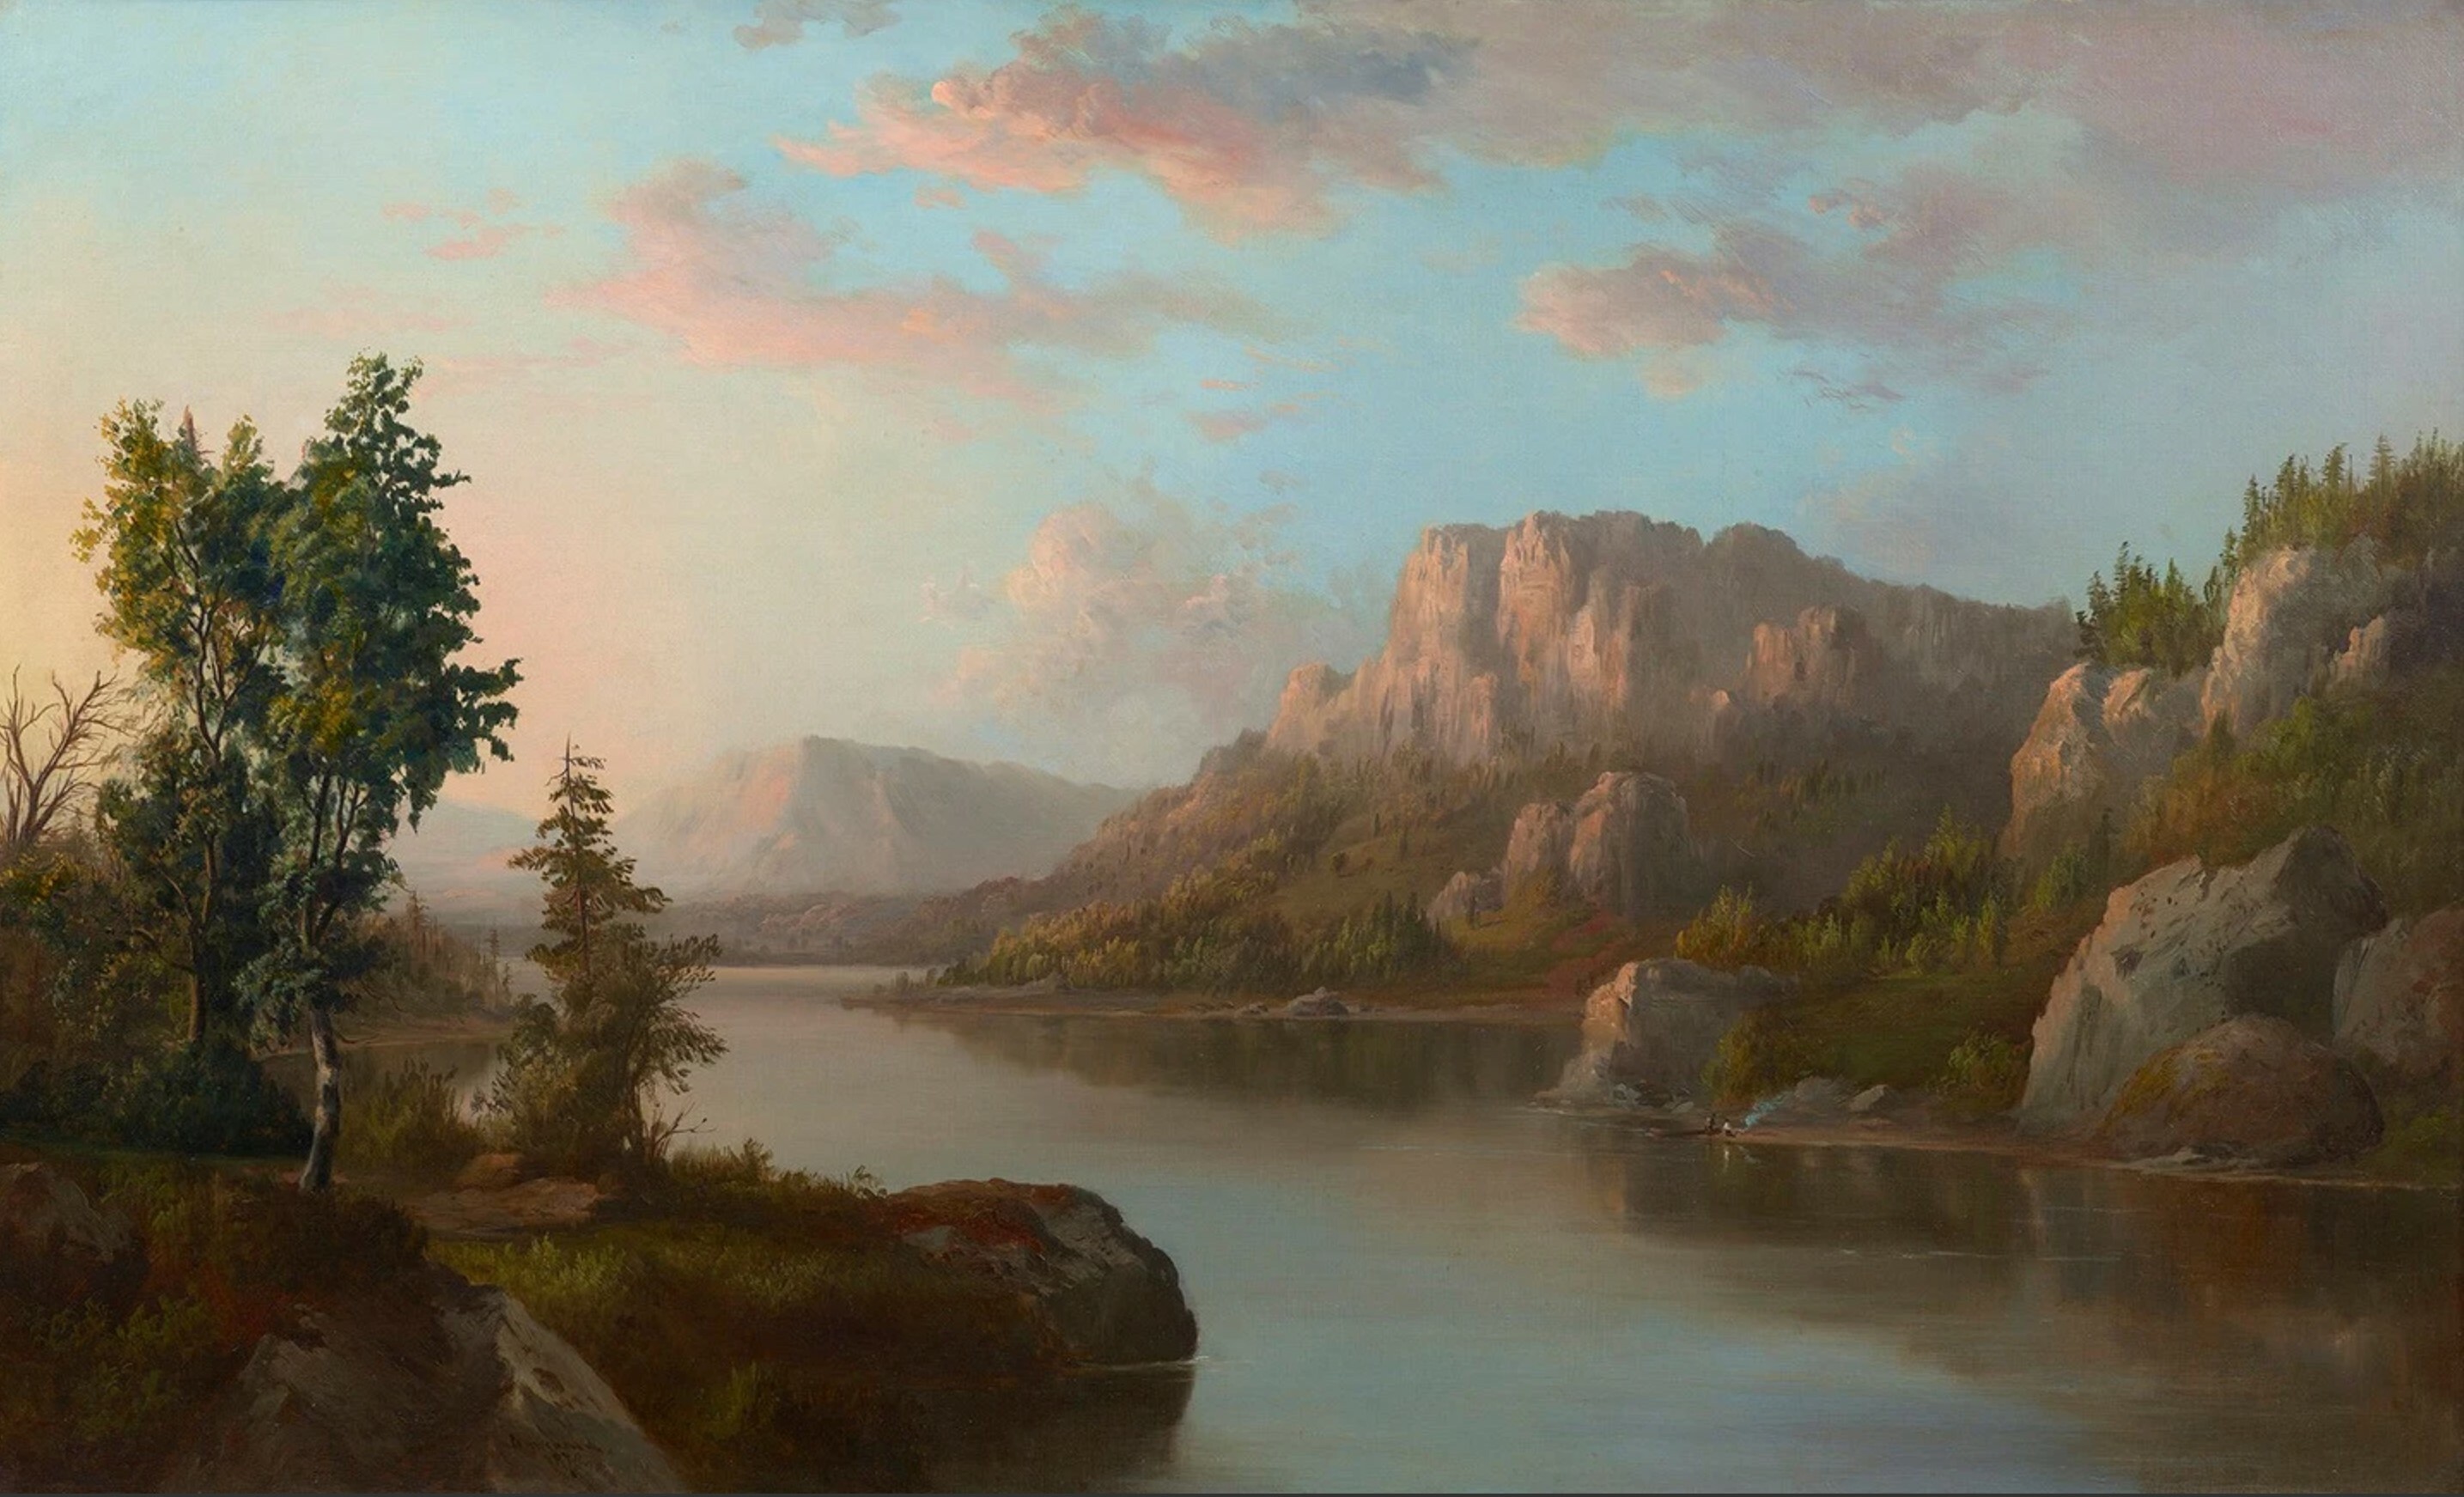 Robert S. Duncanson, "Landscape," 1870, Oil on canvas, 30 x 50 in. (76.2 x 127 cm), Museum Purchase with funds provided by the Robert C. Vance Foundation, 2022.8